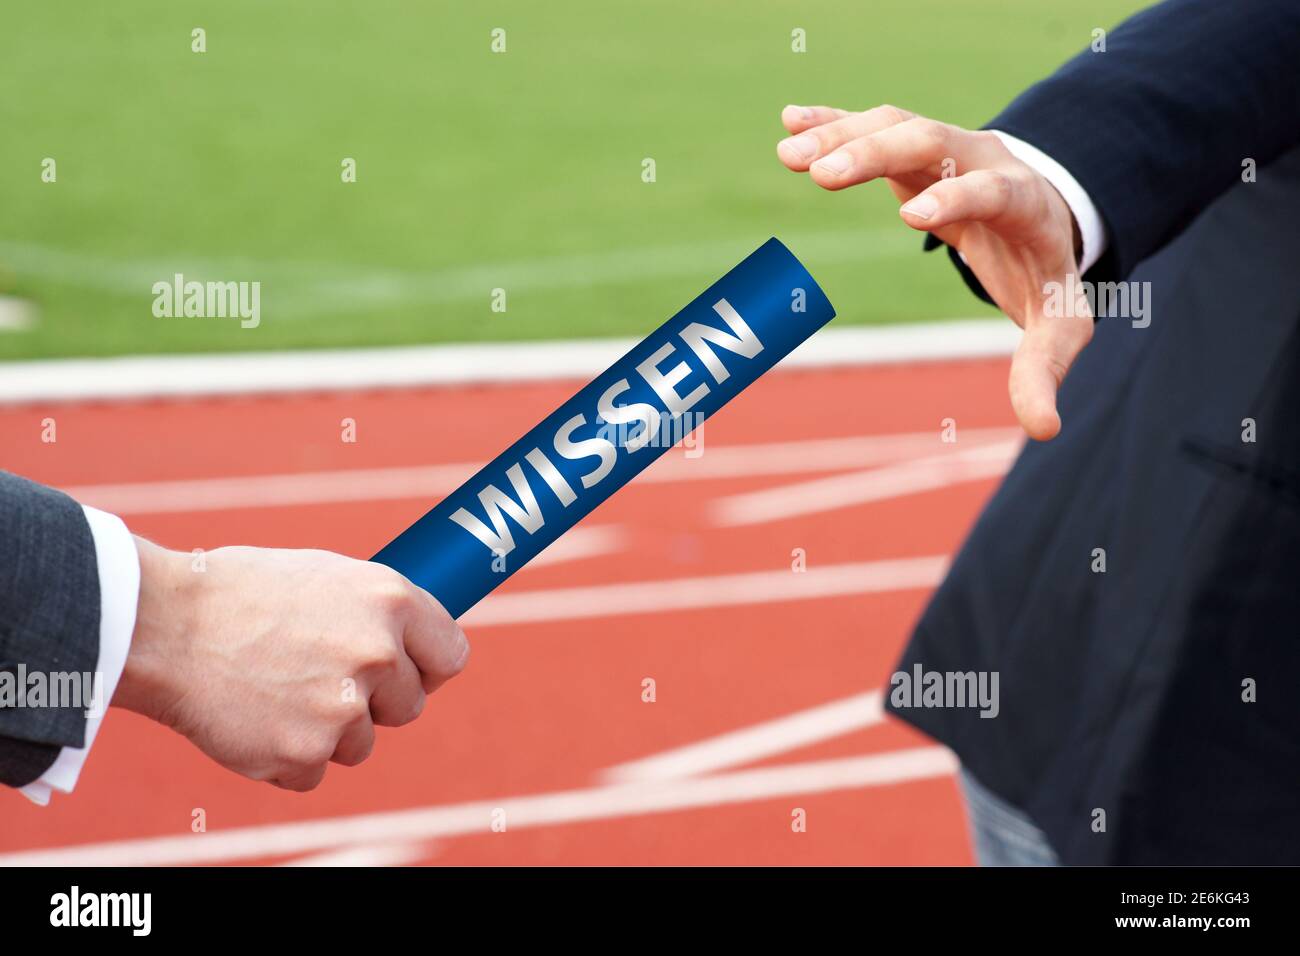 Businessmen passing baton in relay race with German word Wissen means Knowledge  Stock Photo